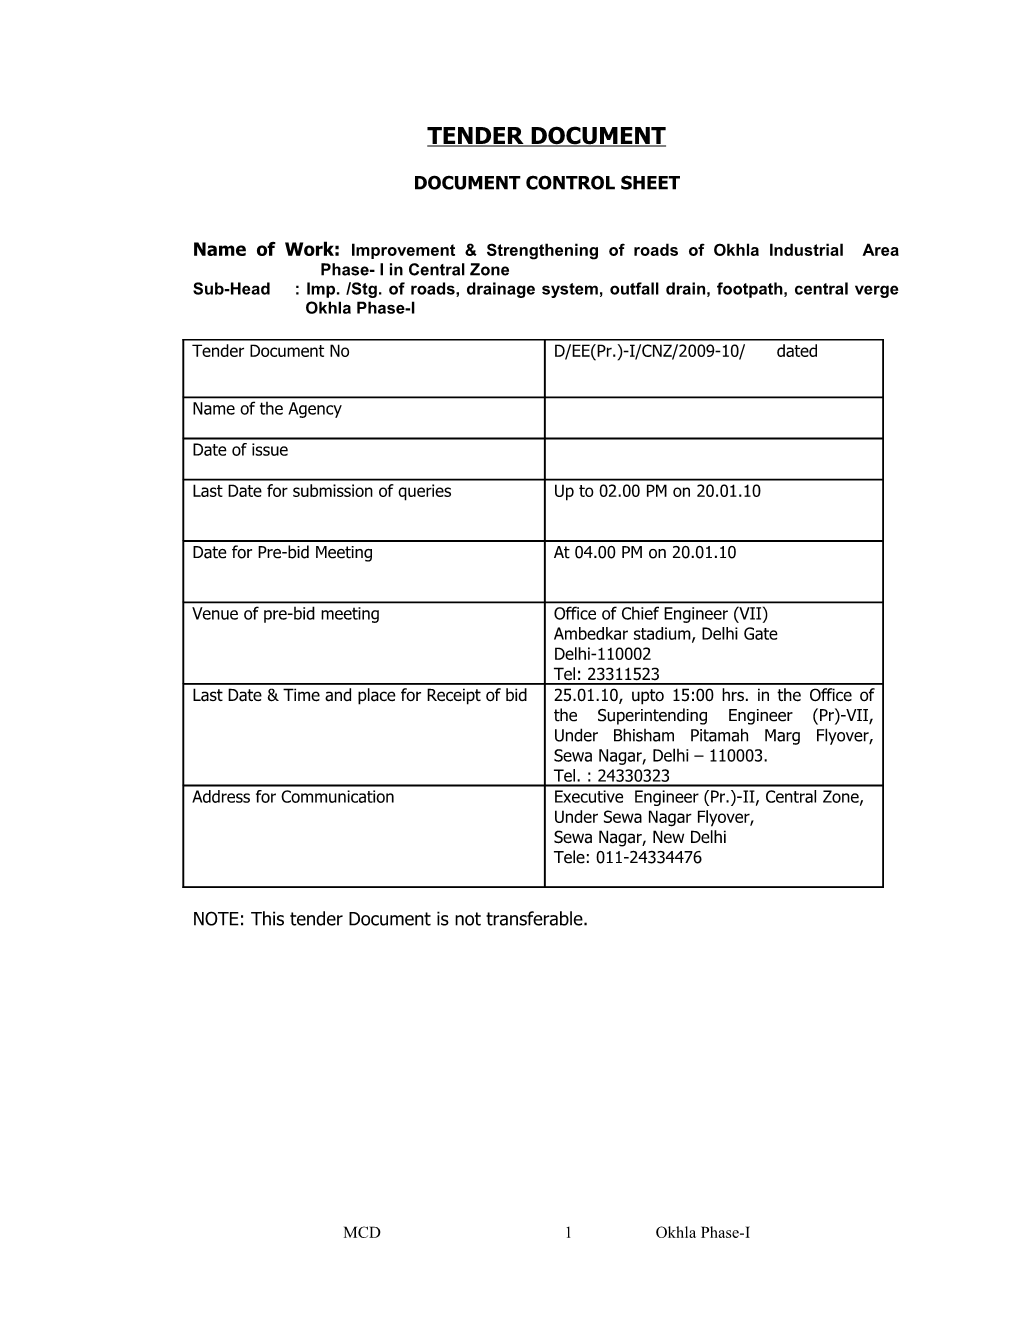 Name of Work: Improvement & Strengthening of Roads of Okhla Industrial Area Phase- I In